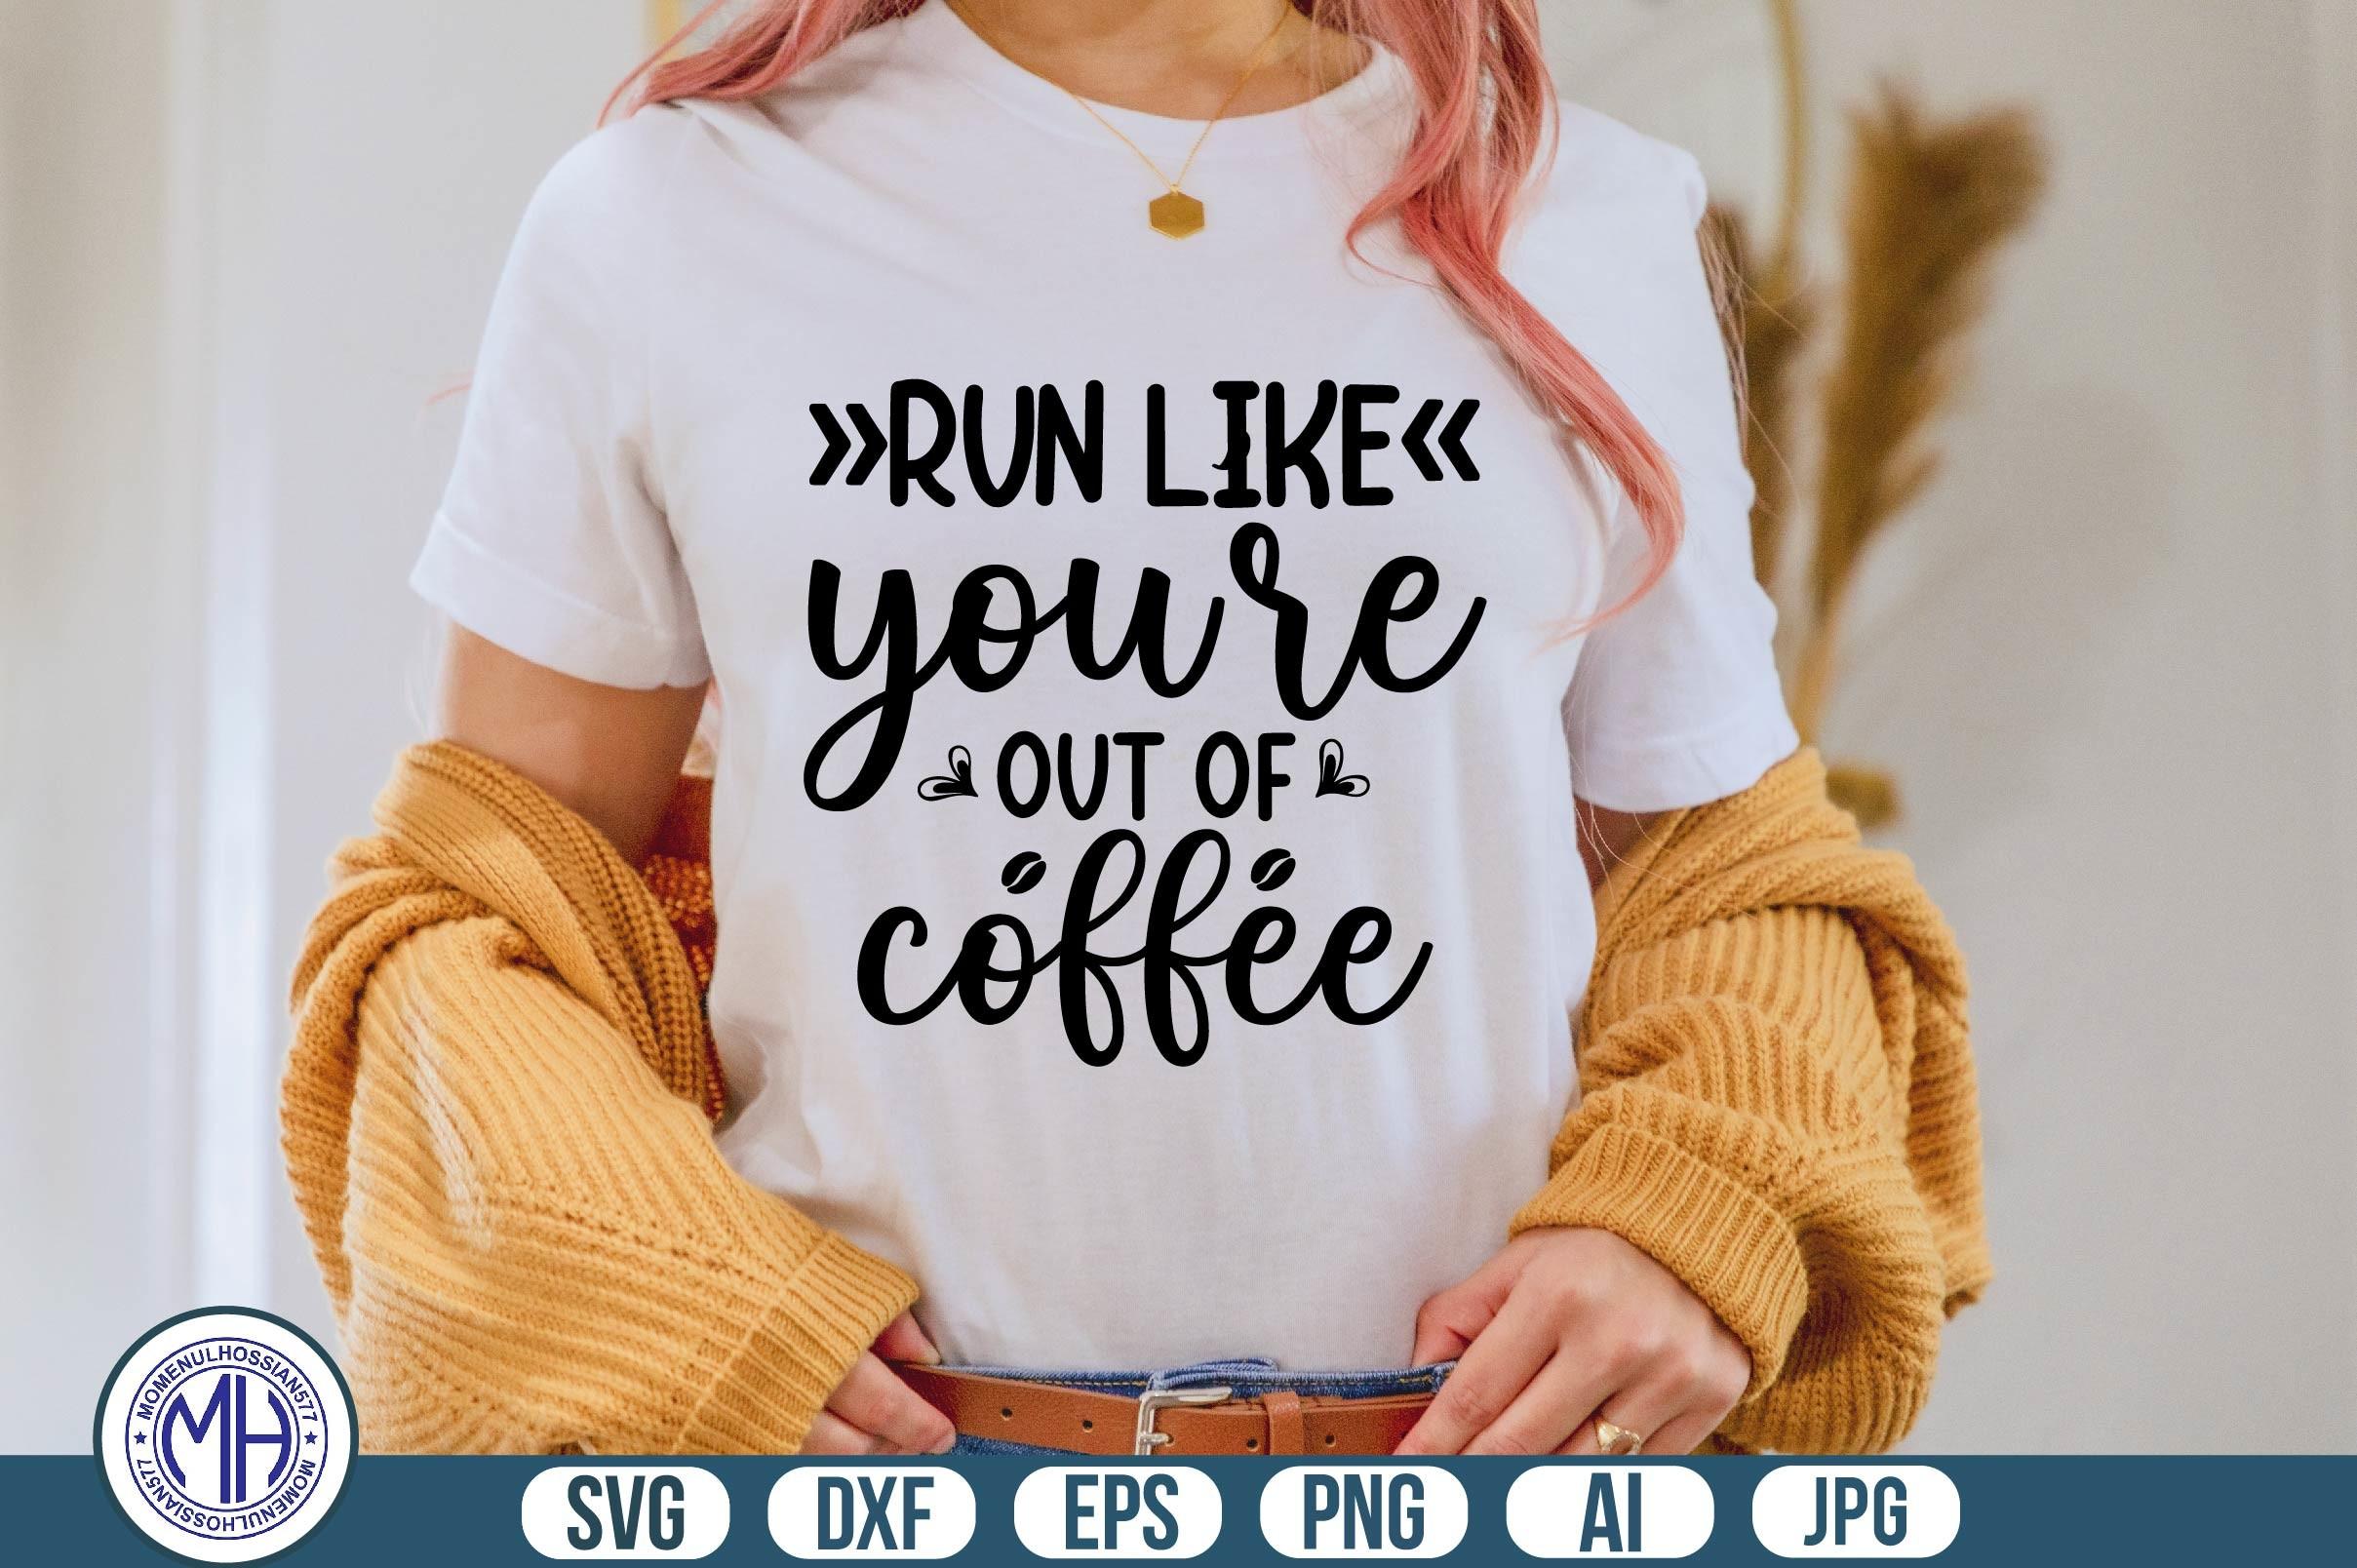 Run Like Your'e out of Coffee